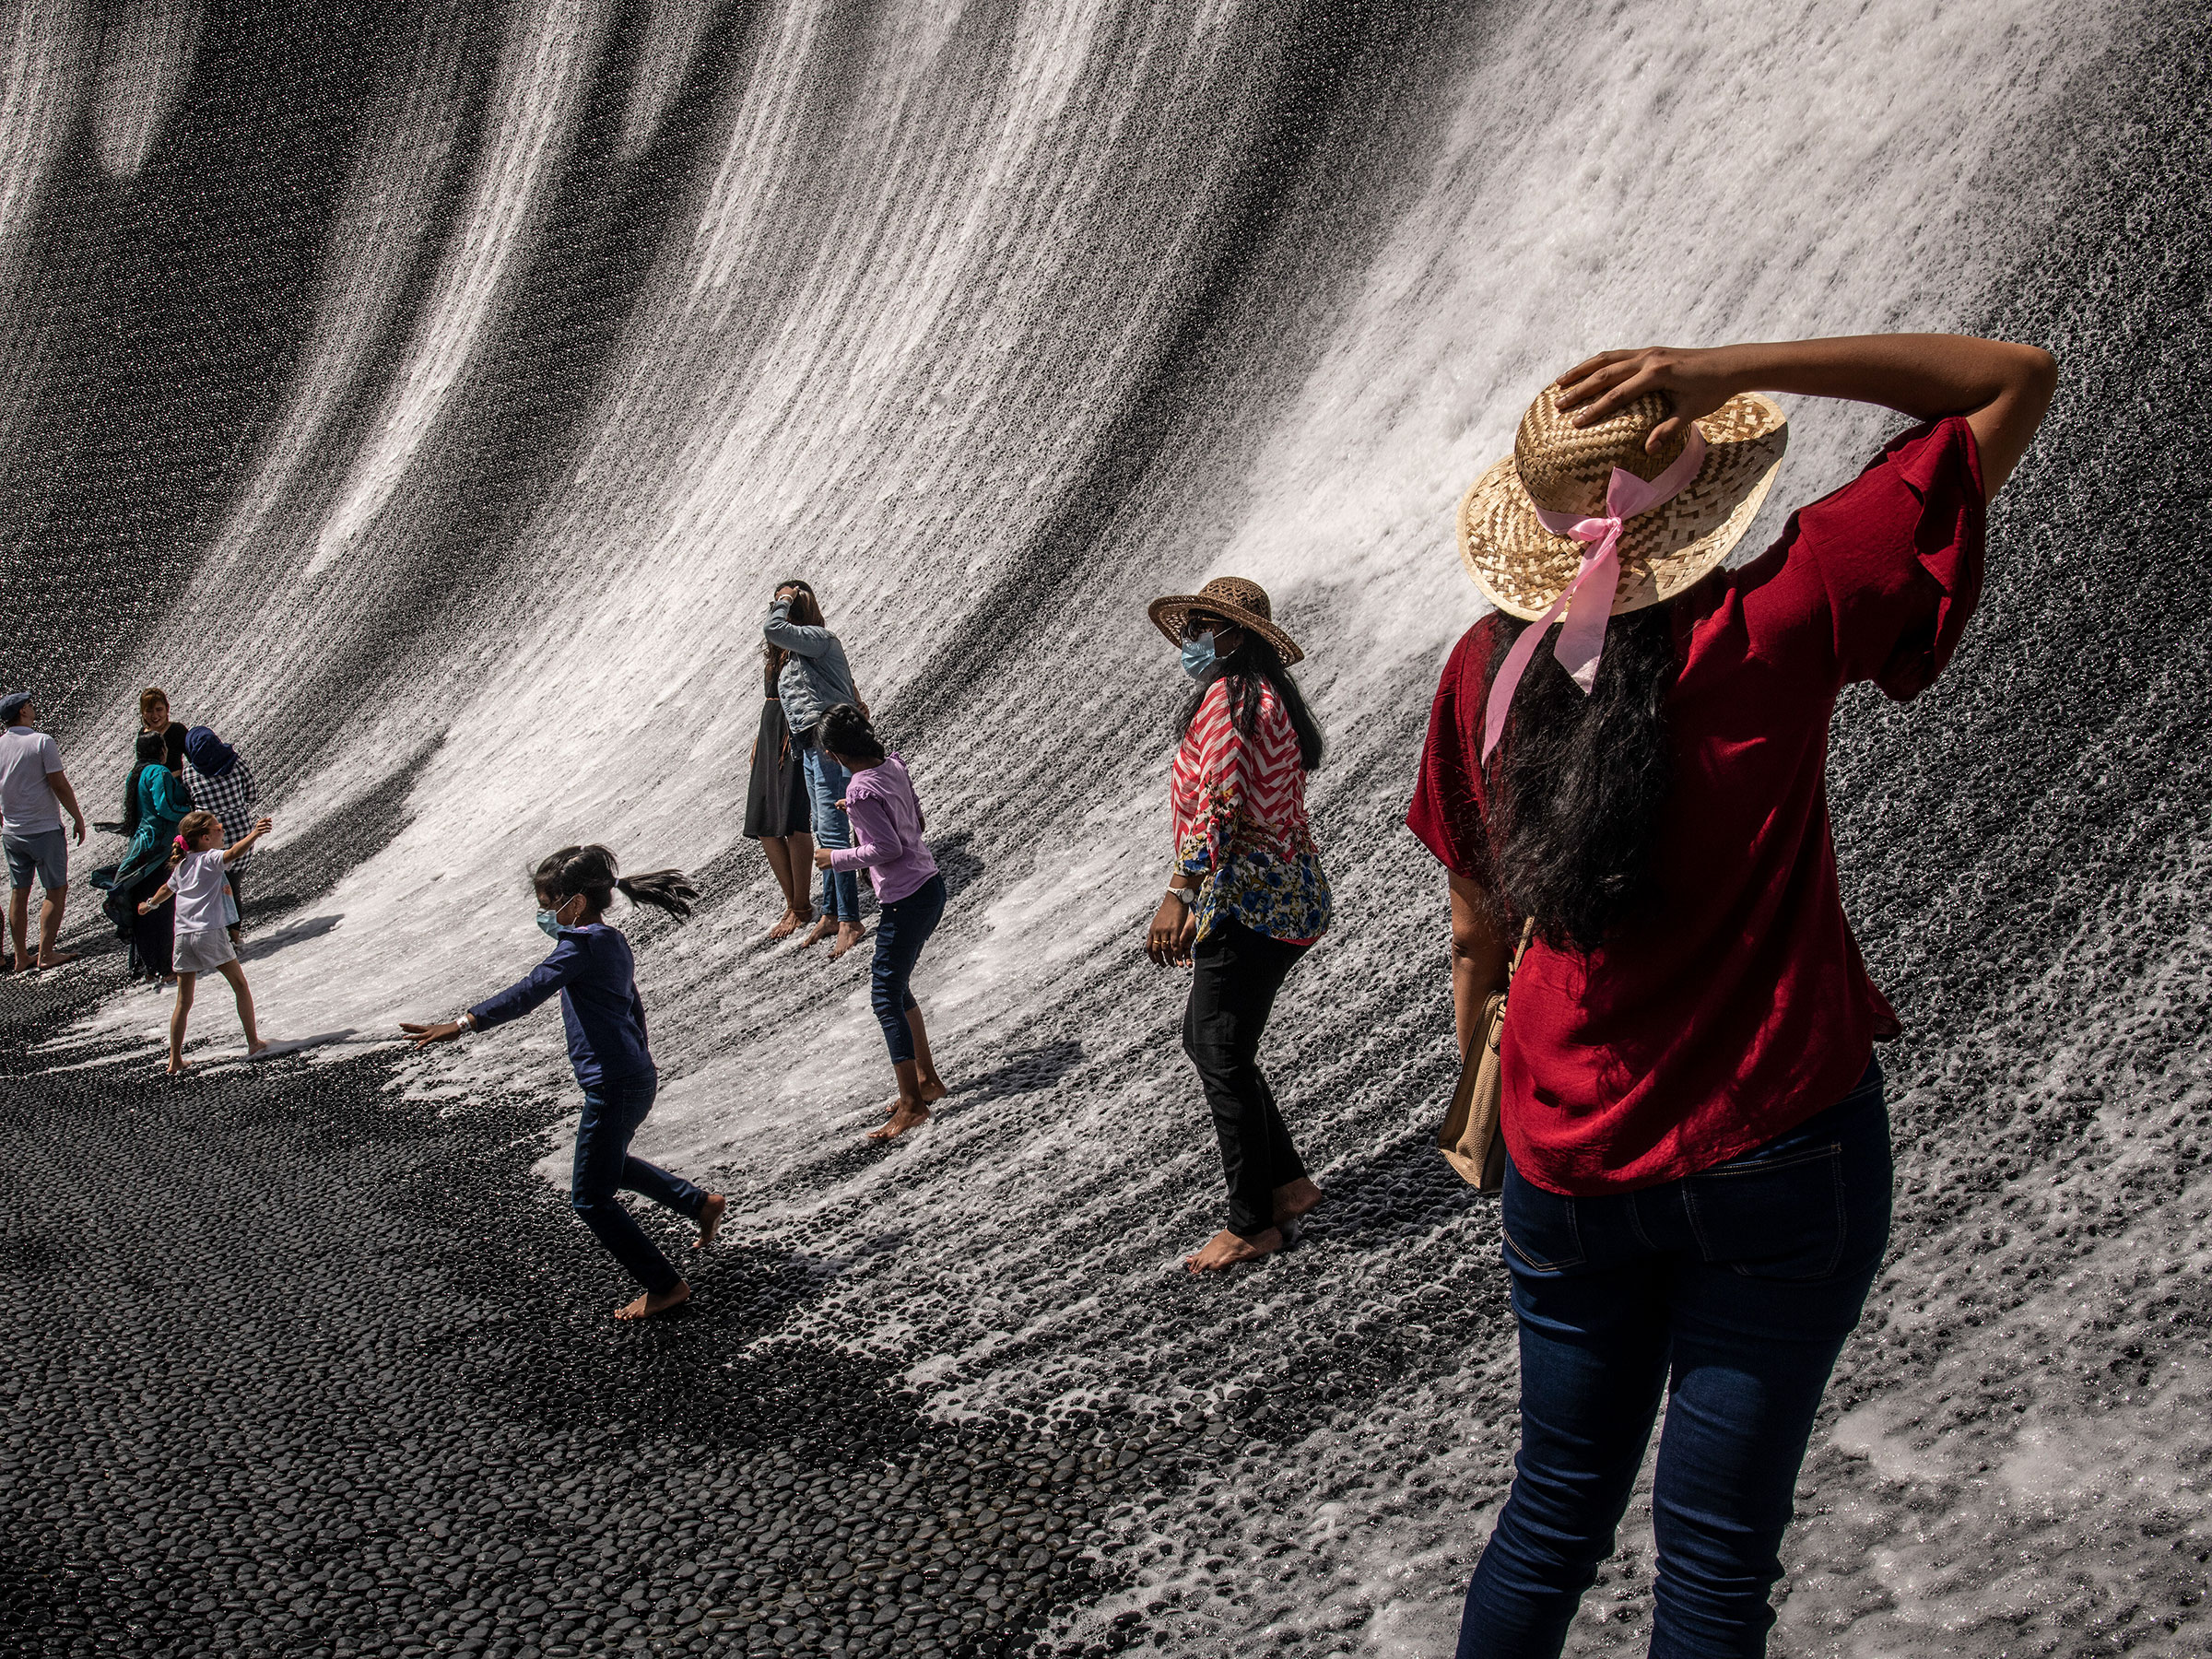 Visitors at the "Surreal" water attraction, featuring a 360-degree, 14-meter-high wall of cascading water, in Dubai, March 2022.